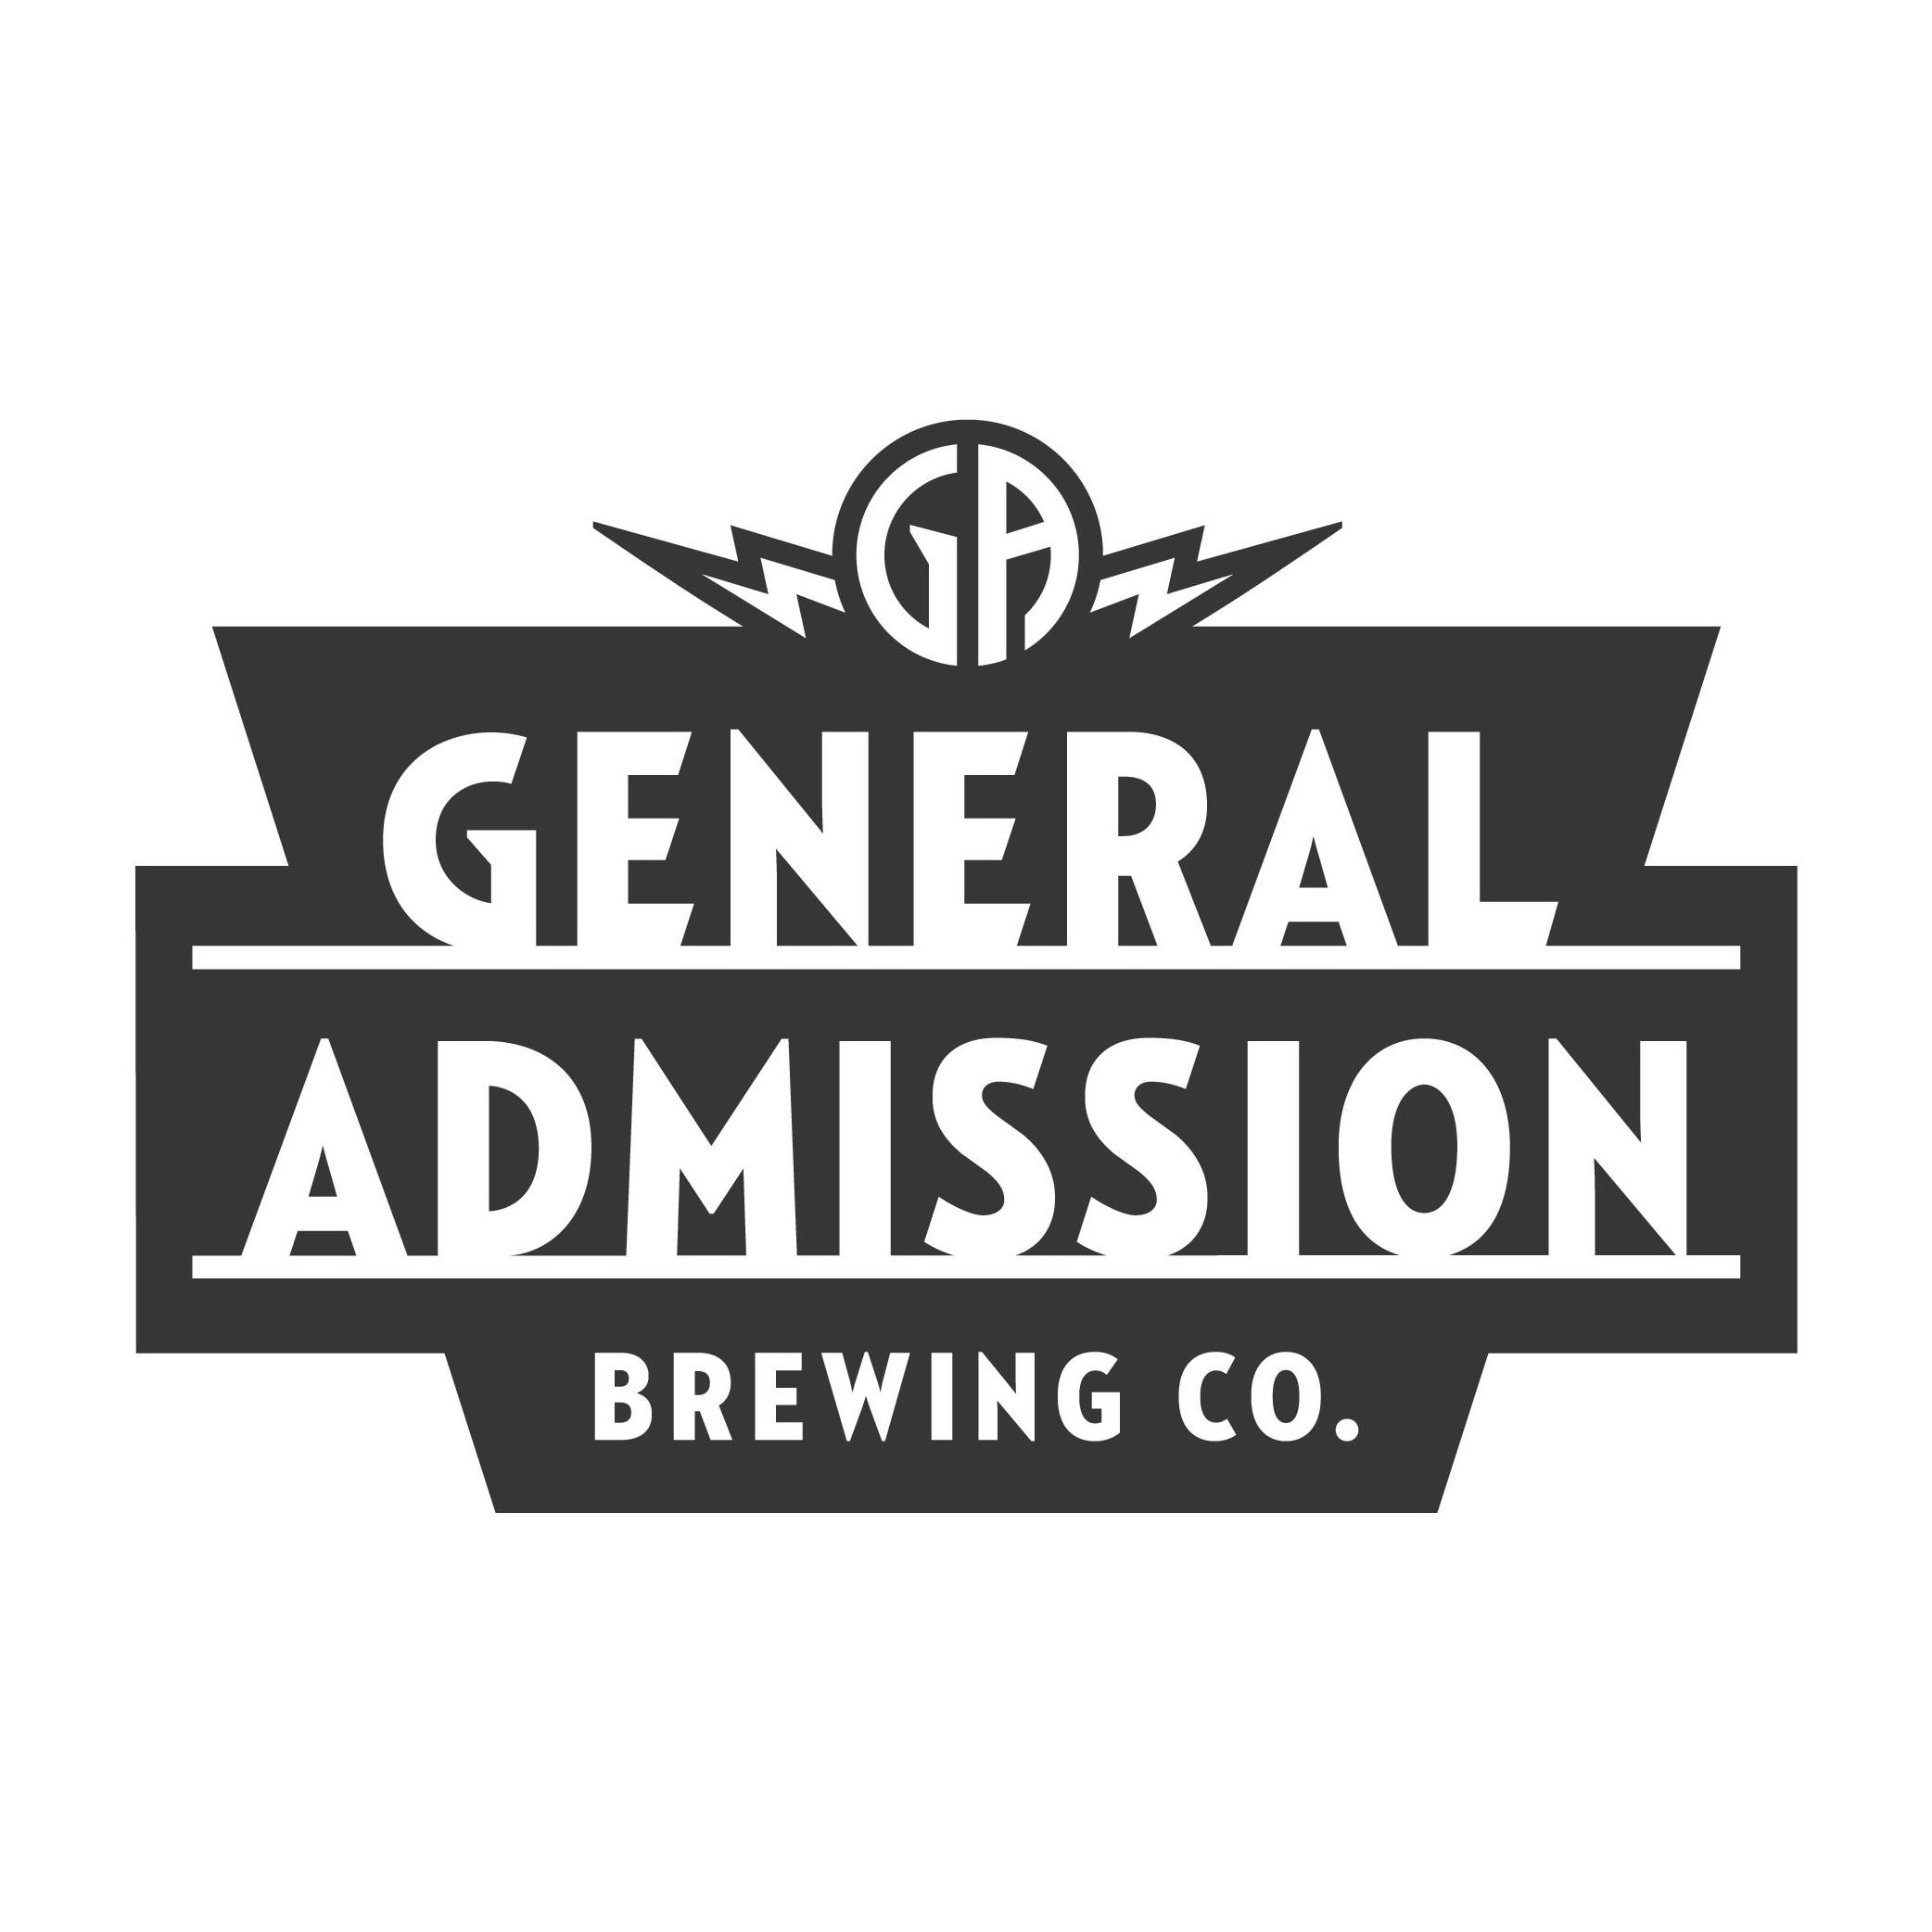  GA GENERAL ADMISSION BREWING CO.